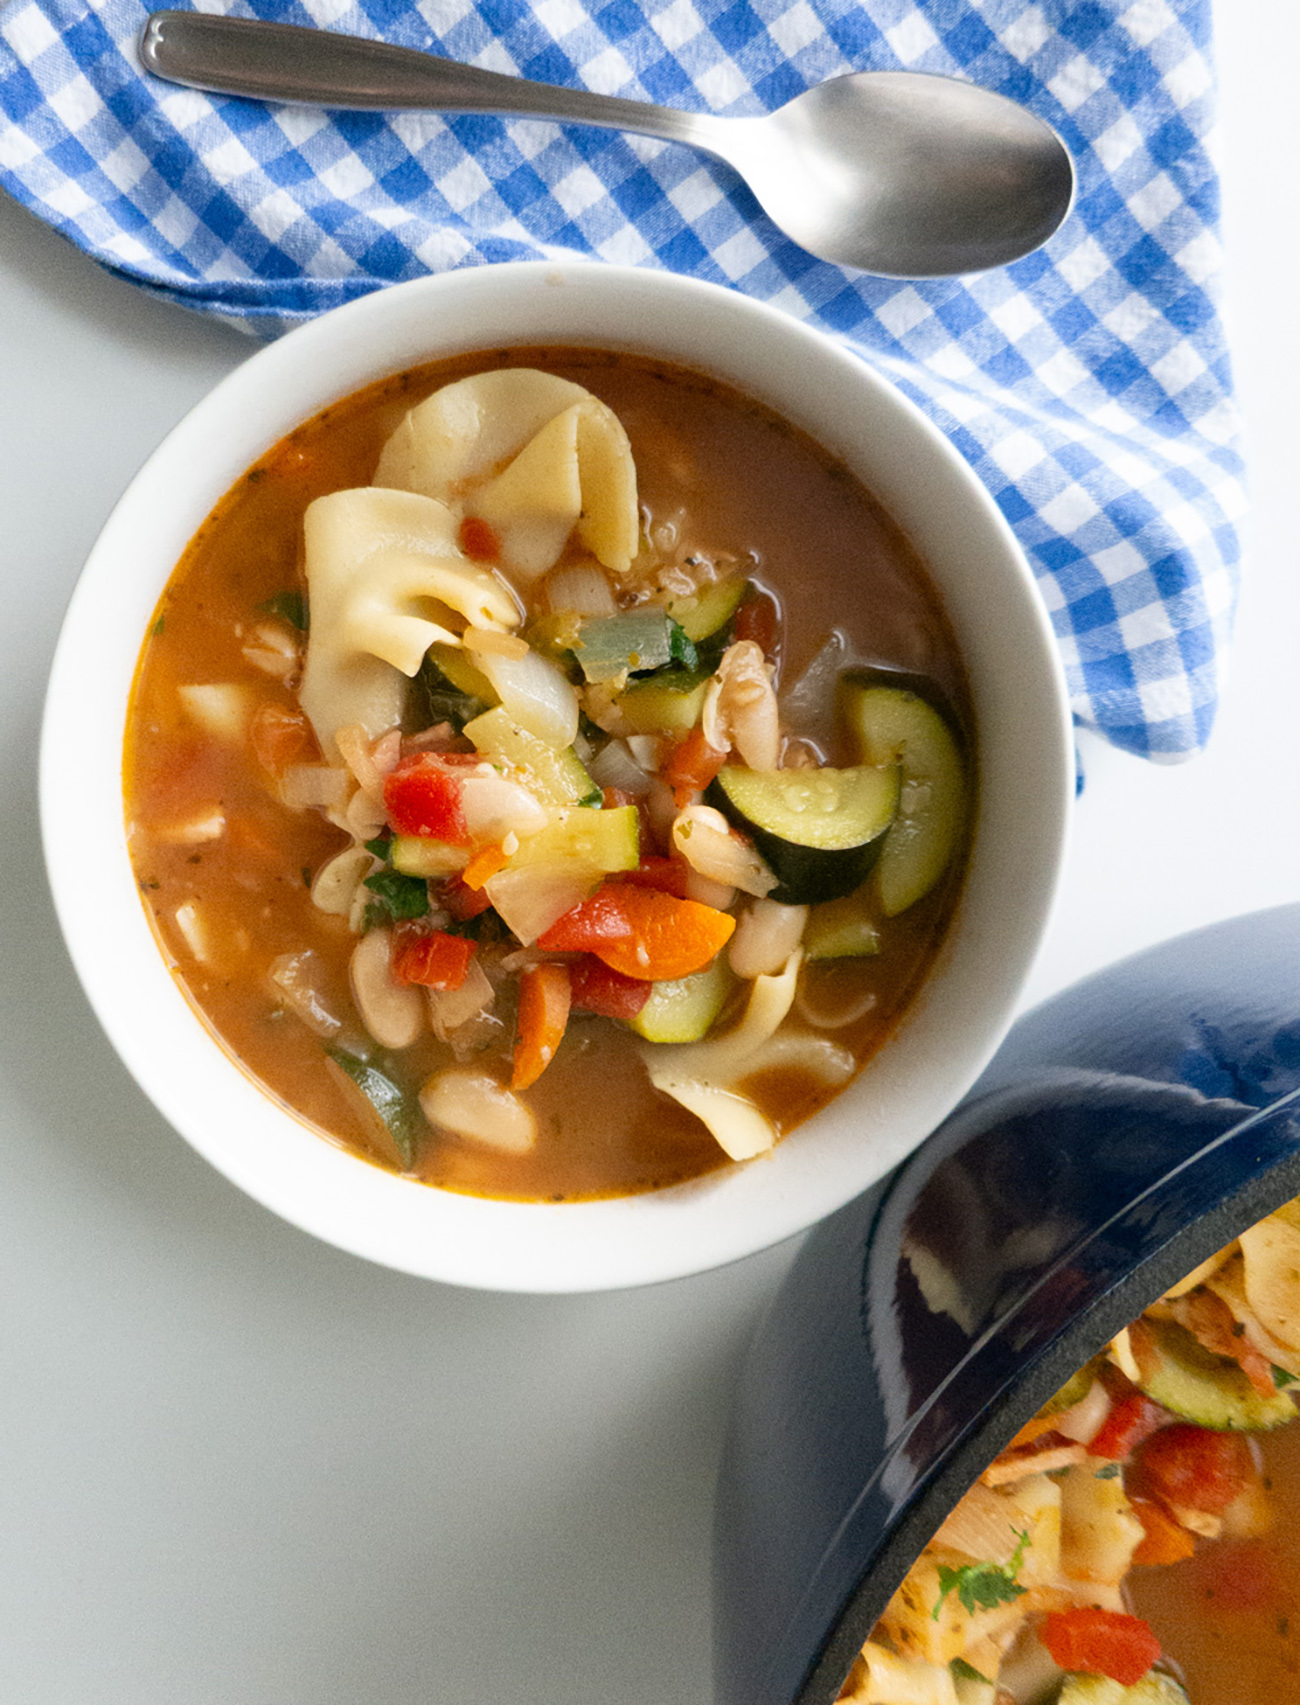 Country Vegetable Soup
